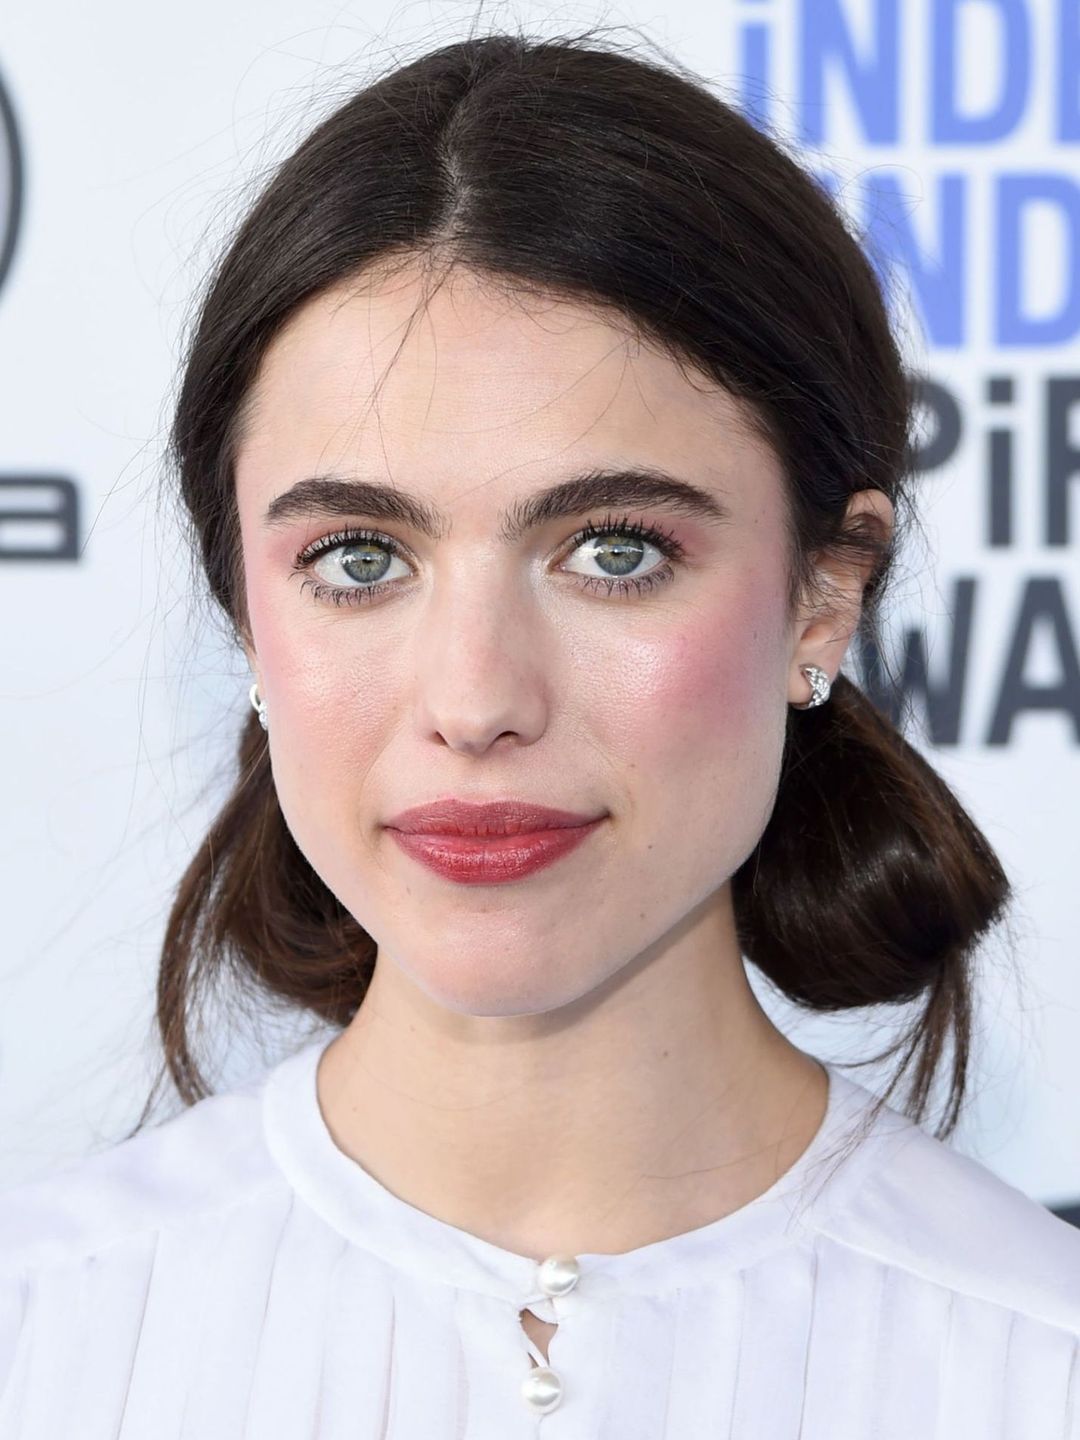 Margaret Qualley in real life